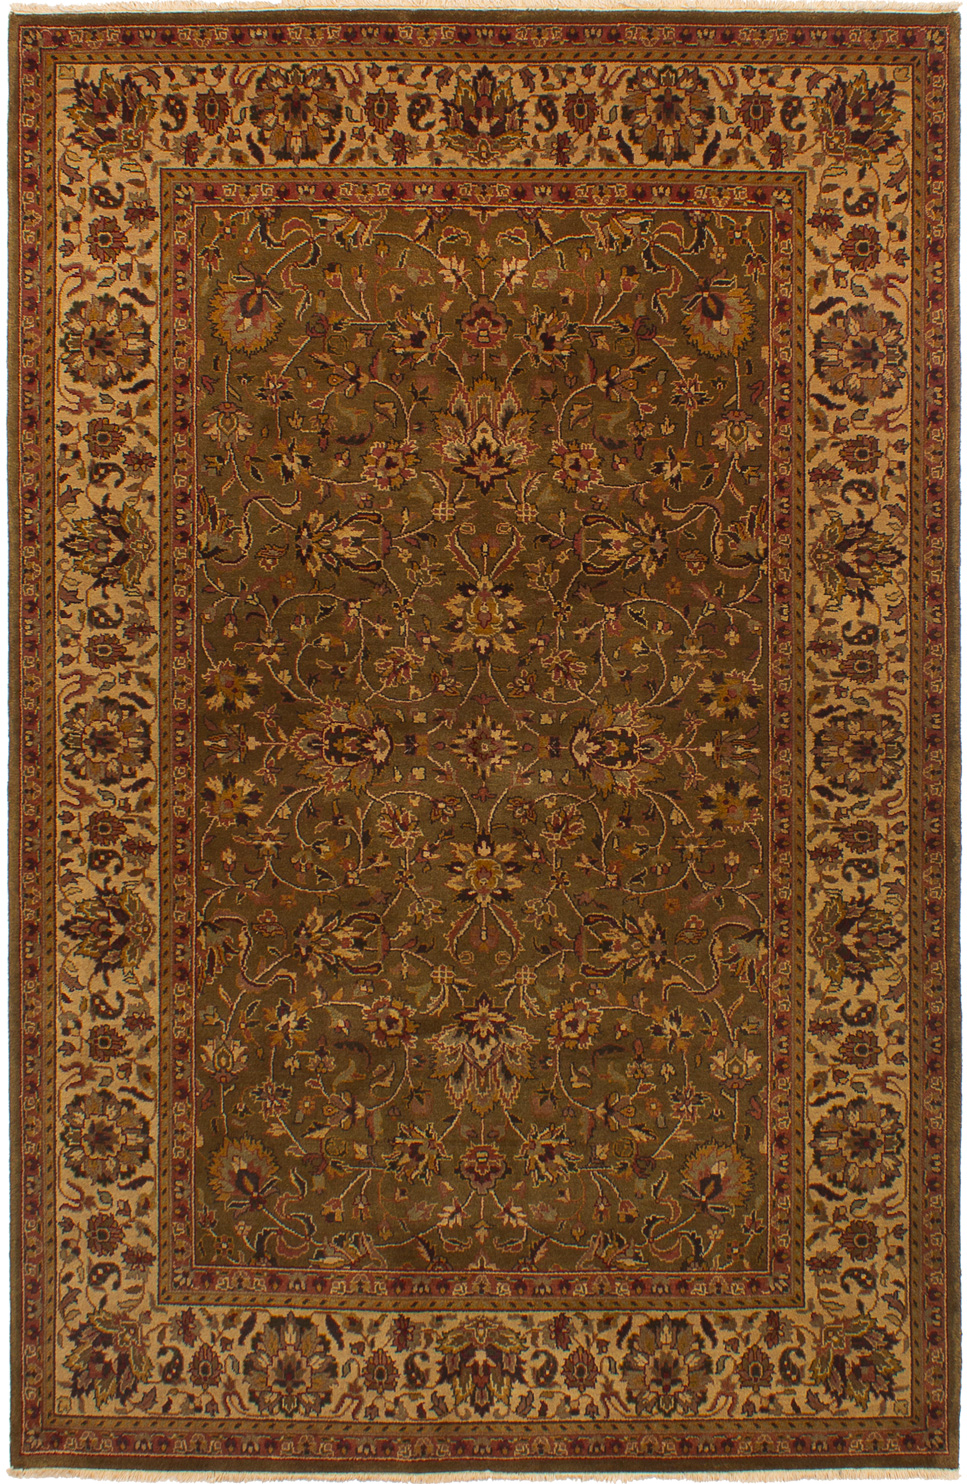 Hand-knotted Jamshidpour Dark Olive Green Wool Rug 5'9" x 8'9" Size: 5'9" x 8'9"  